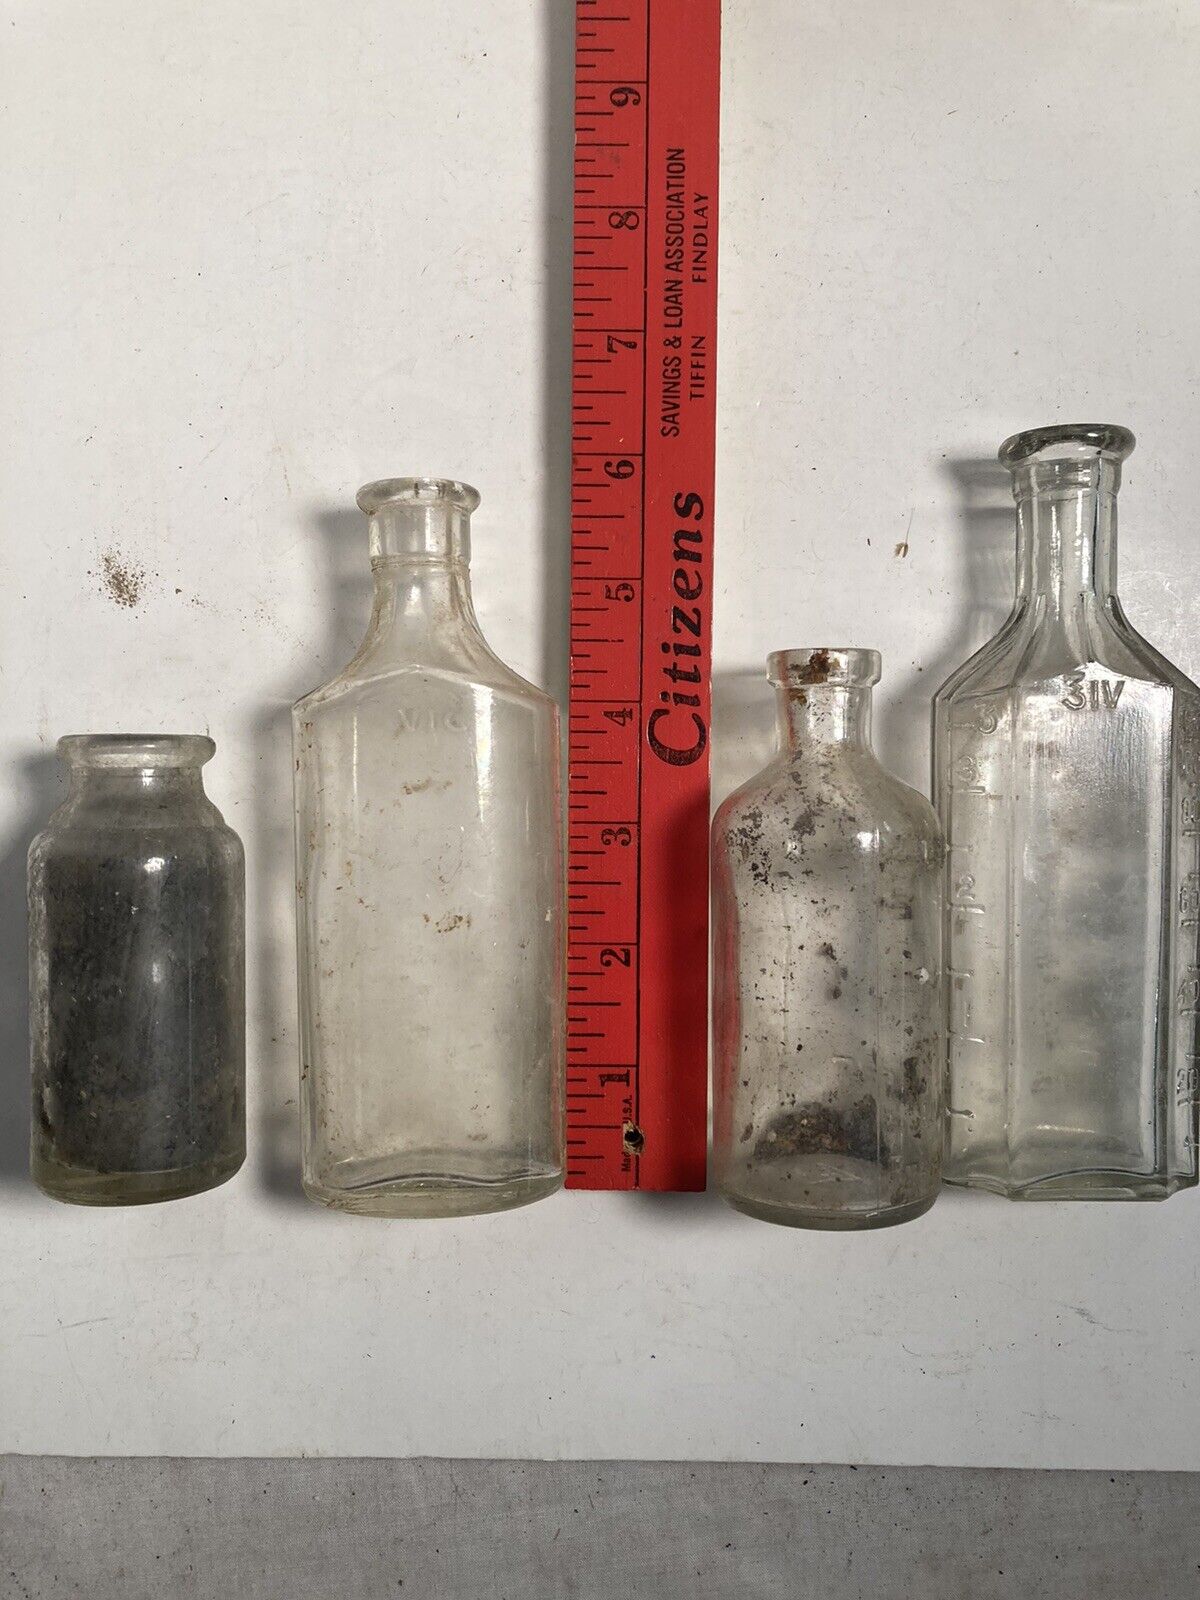 Apothecary, Medicine, Bottles, Industrial, Mercantile Lot of 11, free shipping Без бренда - фотография #3